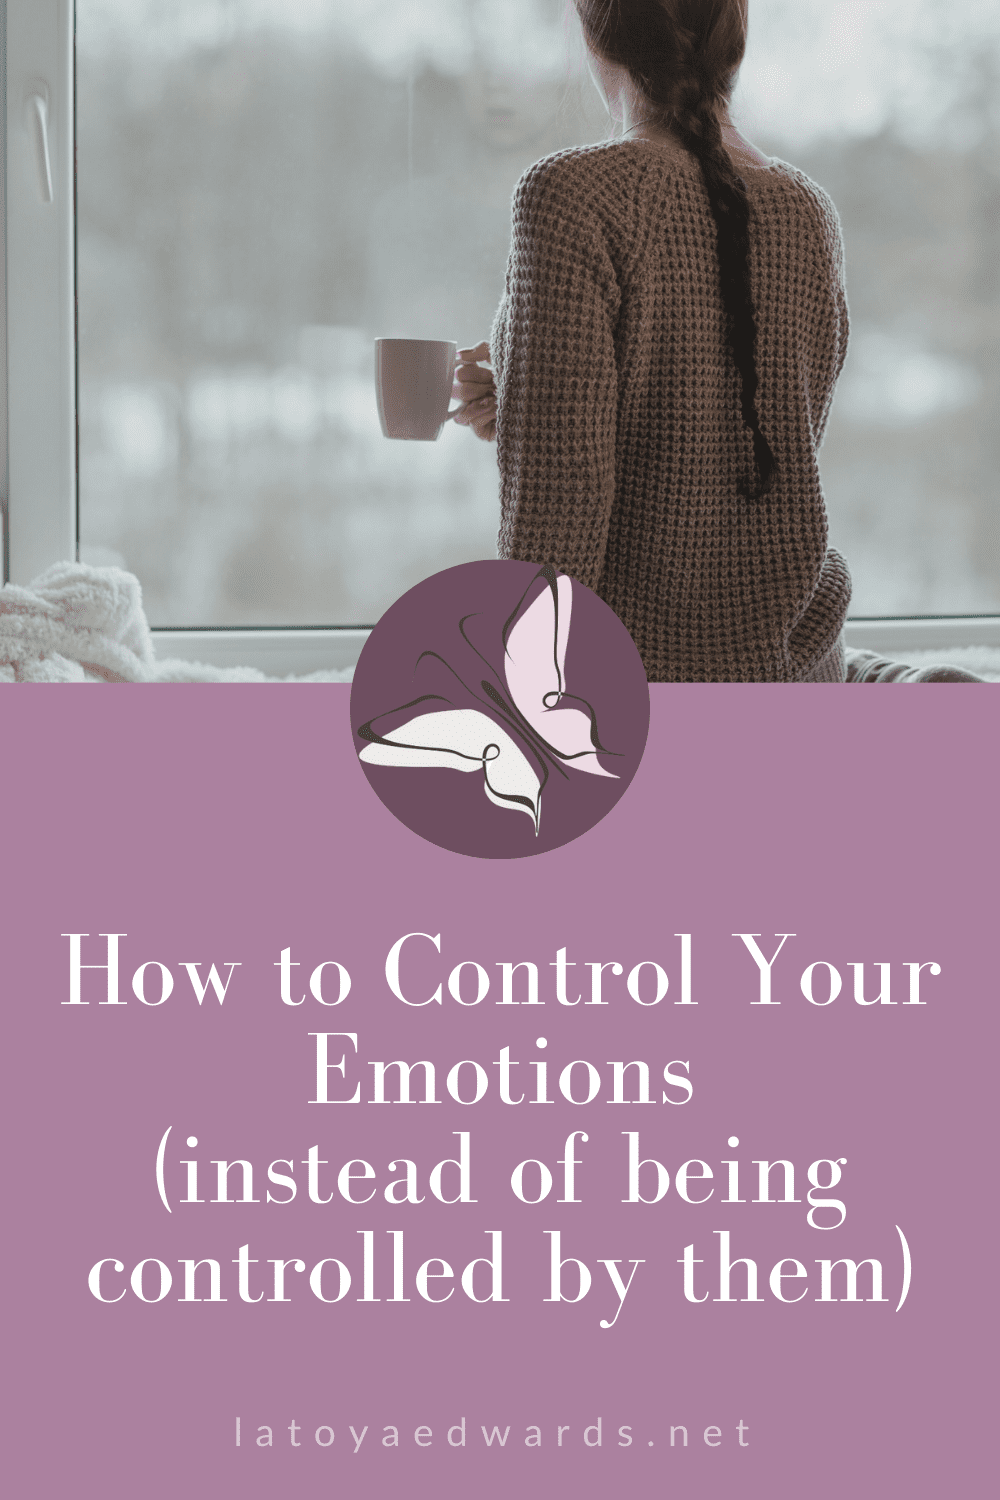 It is possible to learn how to manage overwhelming emotions during the most difficult seasons of life. Feeling overwhelmed by big emotions and negative thoughts is a common struggle when things aren't going well. With this easy-to-follow framework you can finally have peace during hard times by managing your emotions and thoughts.